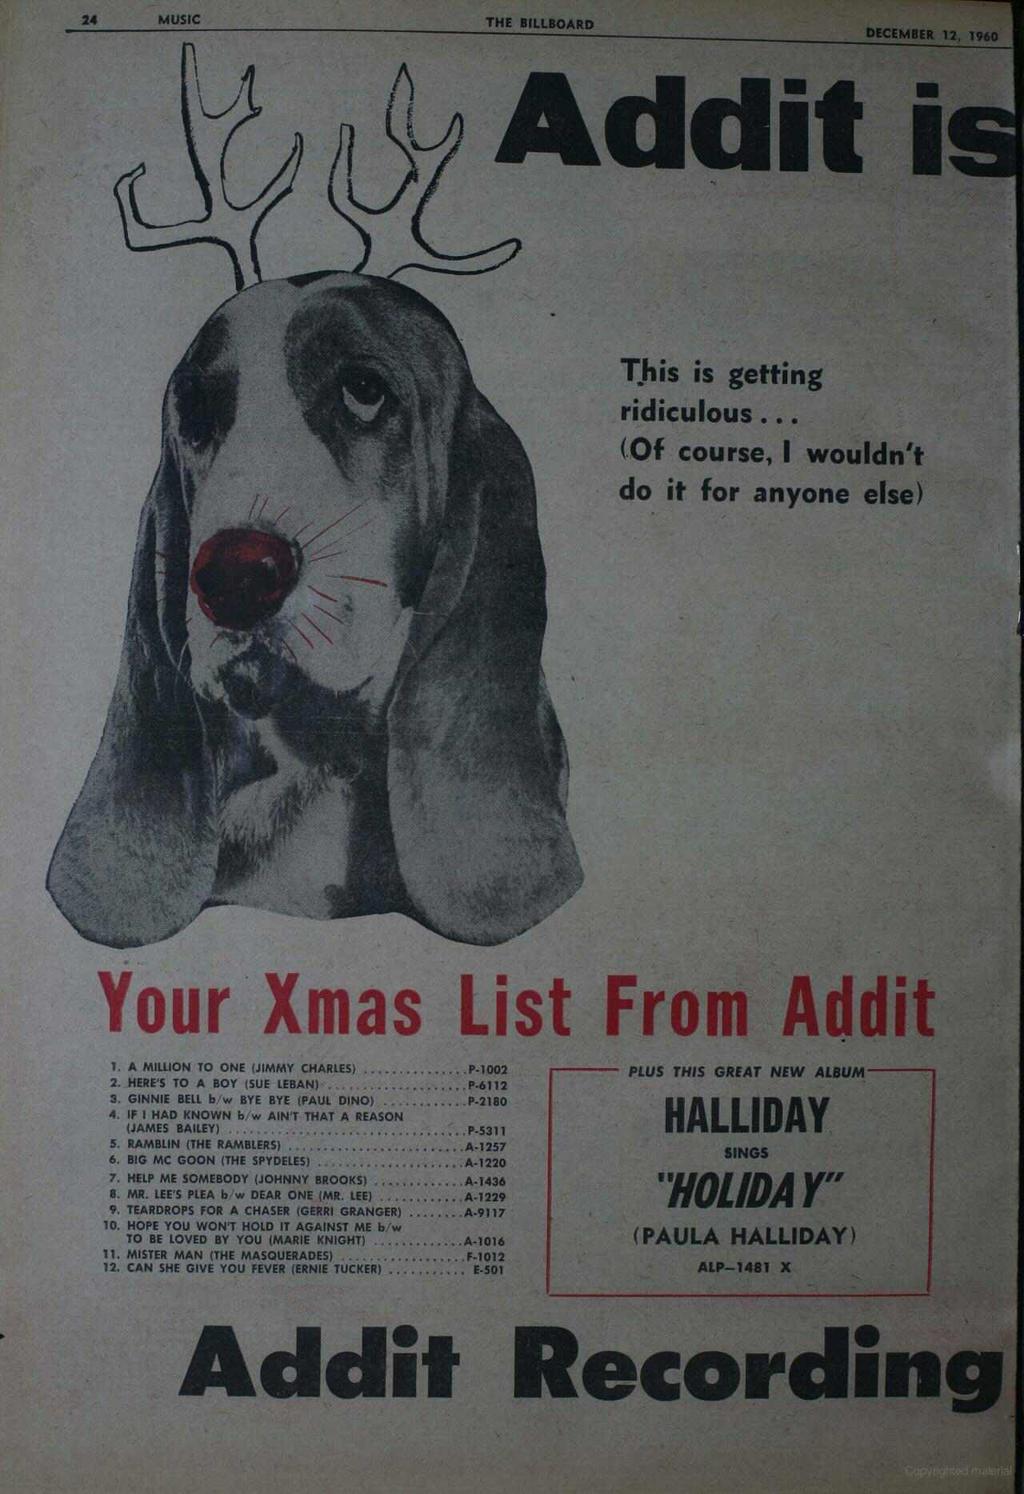 24 MUSIC ti THE BILLBOARD DECEMBER 12, 1960 Addìt This is getting ridiculous... (Of course, I wouldn't do it for anyone else) Your Xmas List From Addit 1. A MILLION TO ONE (JIMMY CHARLES) 2.